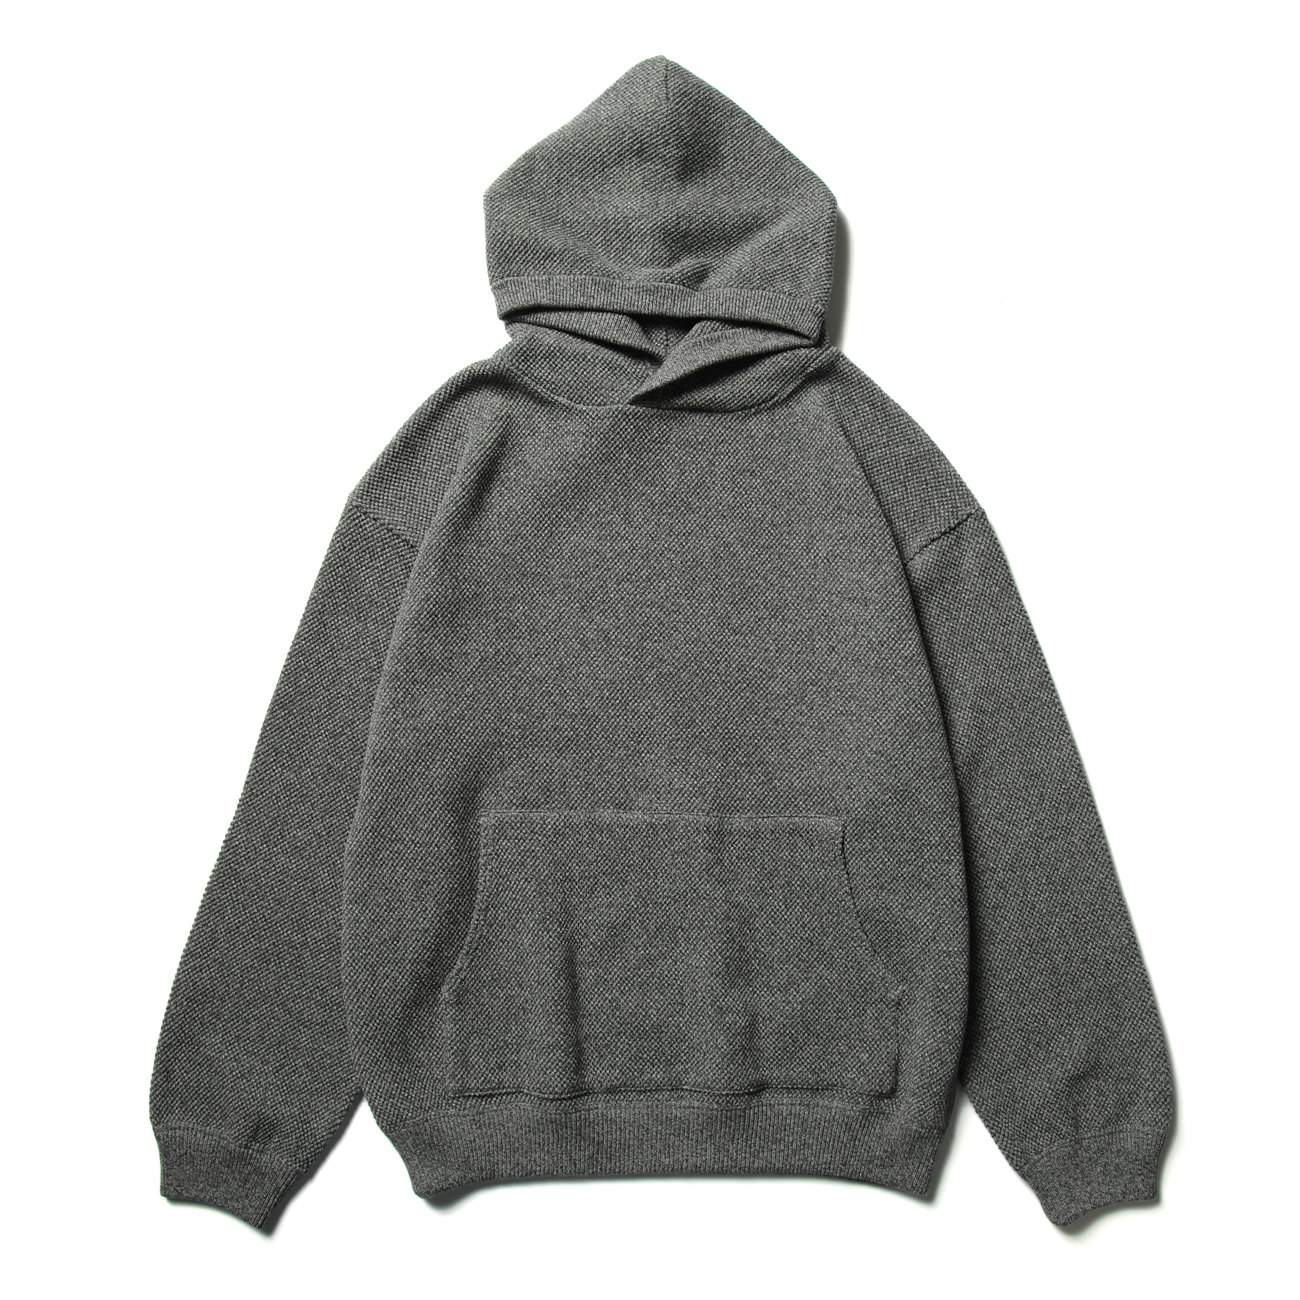 crepuscule / クレプスキュール | Moss stitch hoodie - Black | 通販 ...